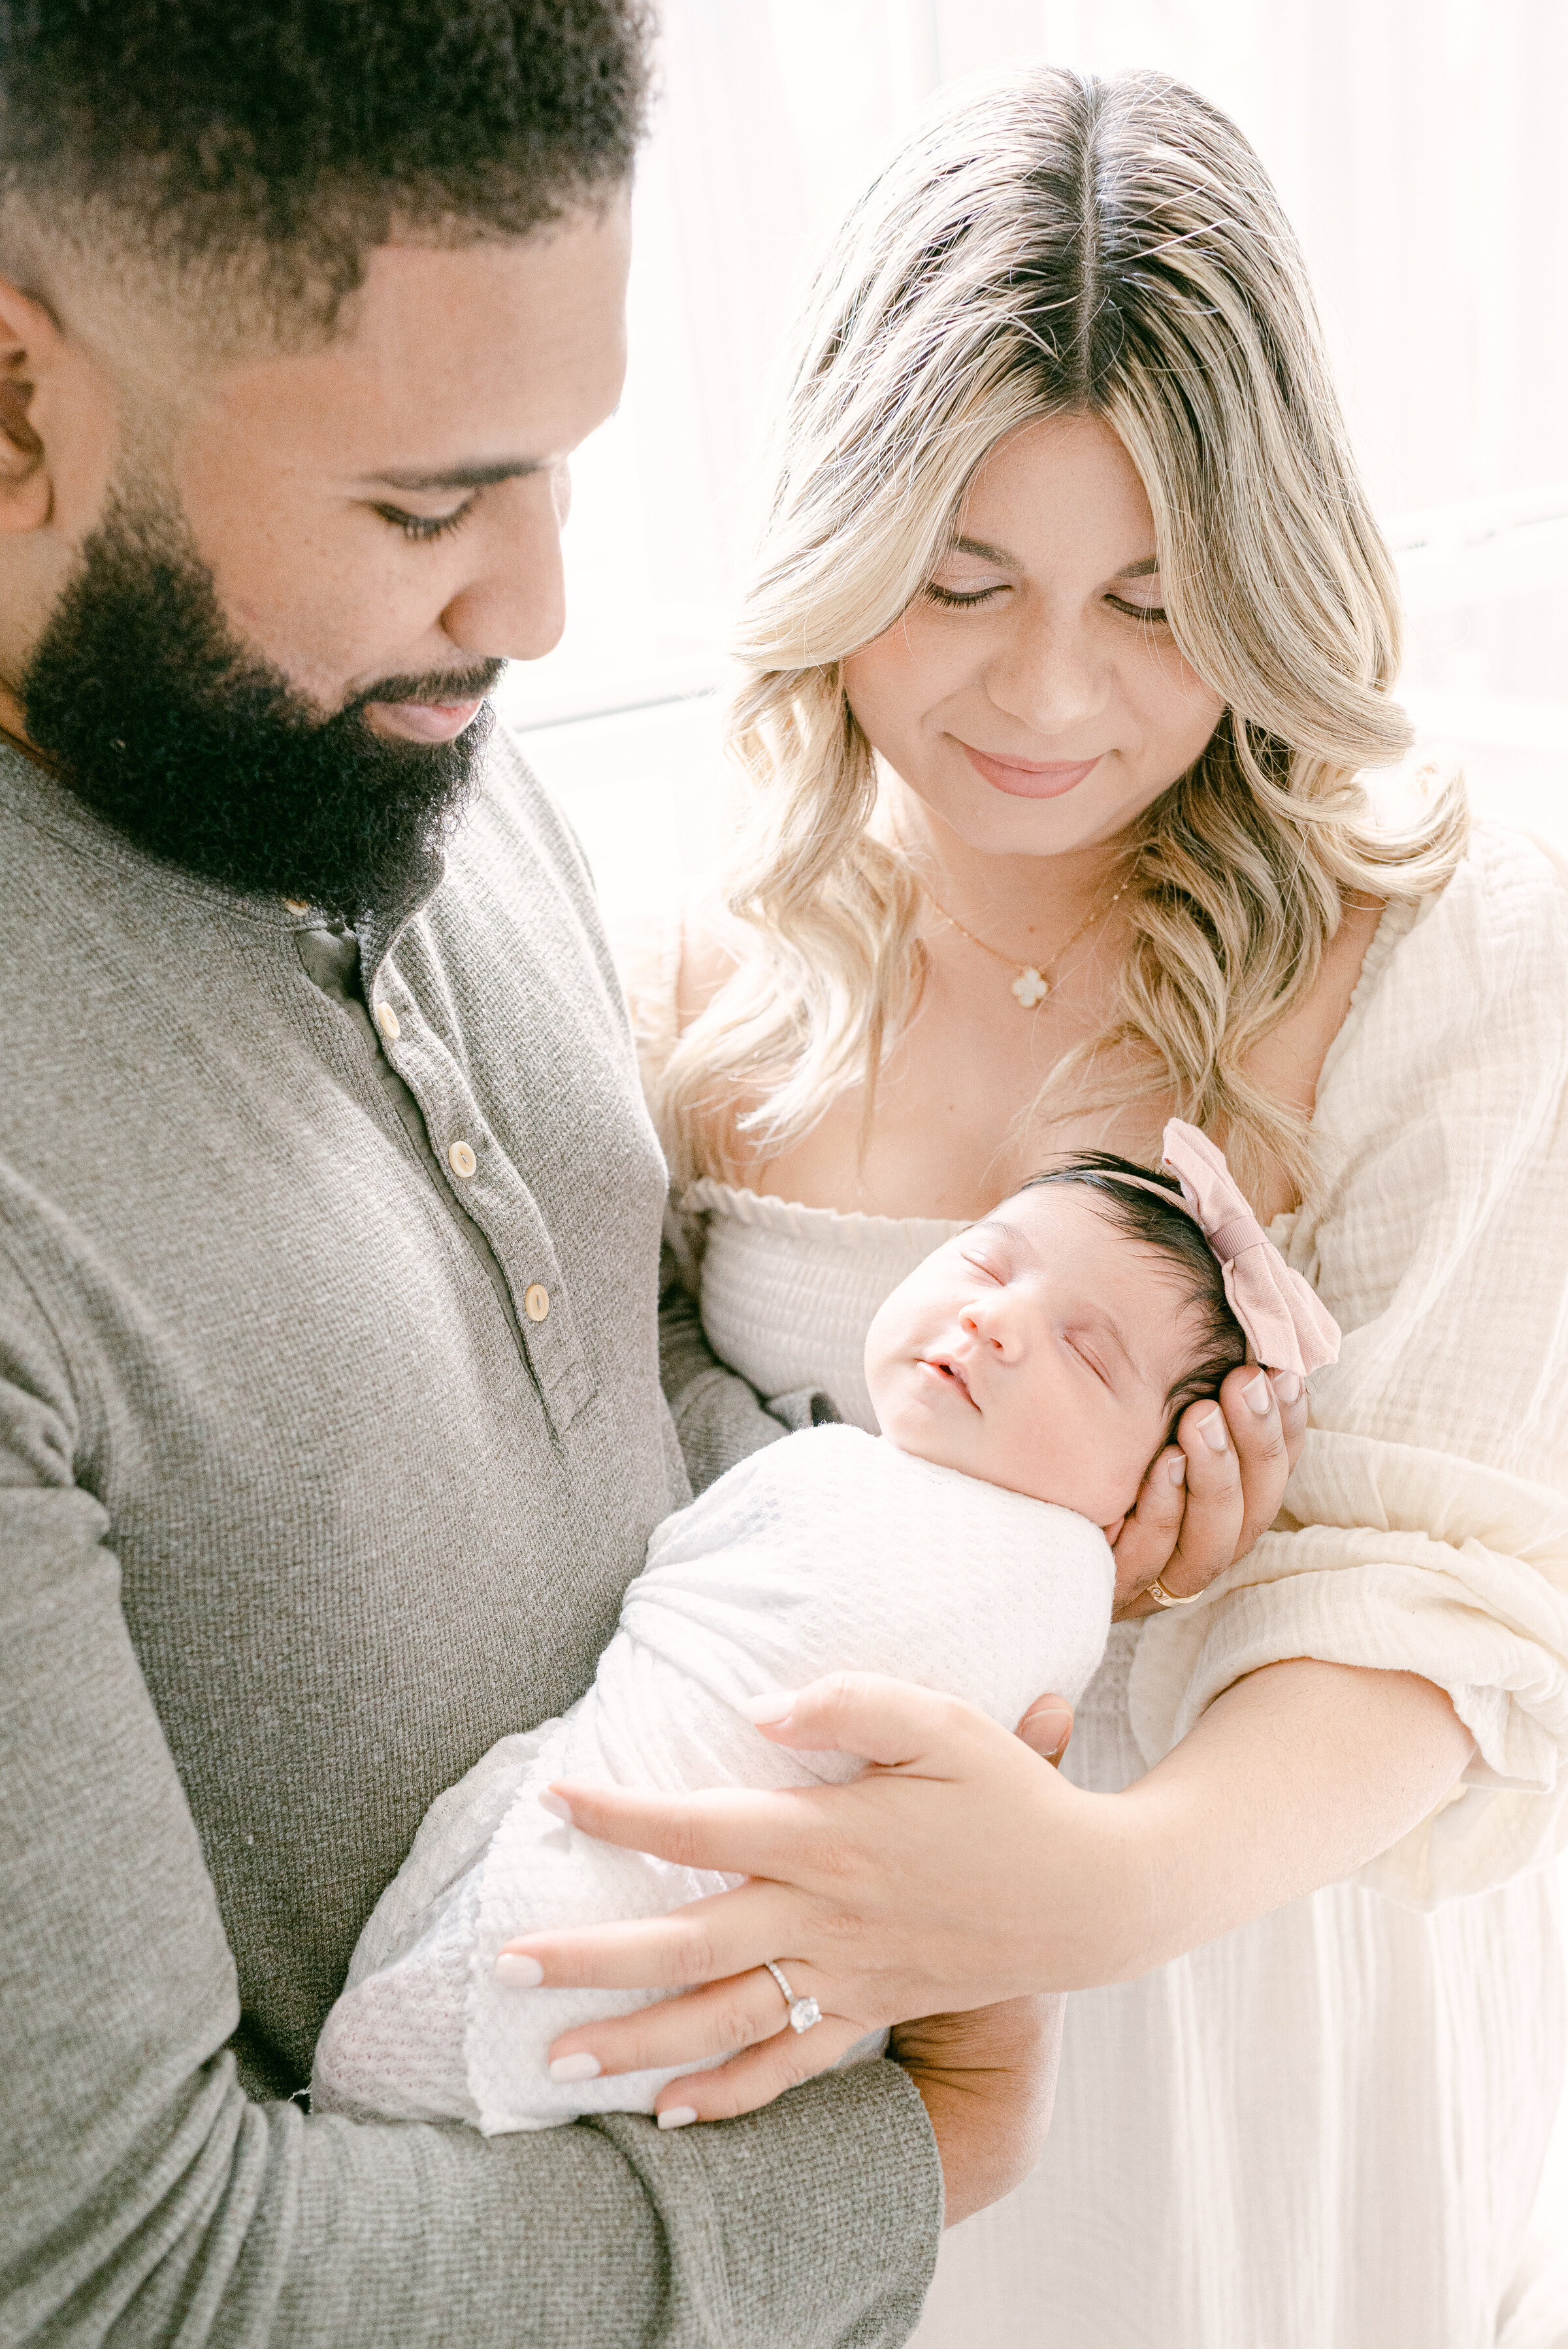 Dad and mom holding their newborn baby by Miami Newborn Photographer